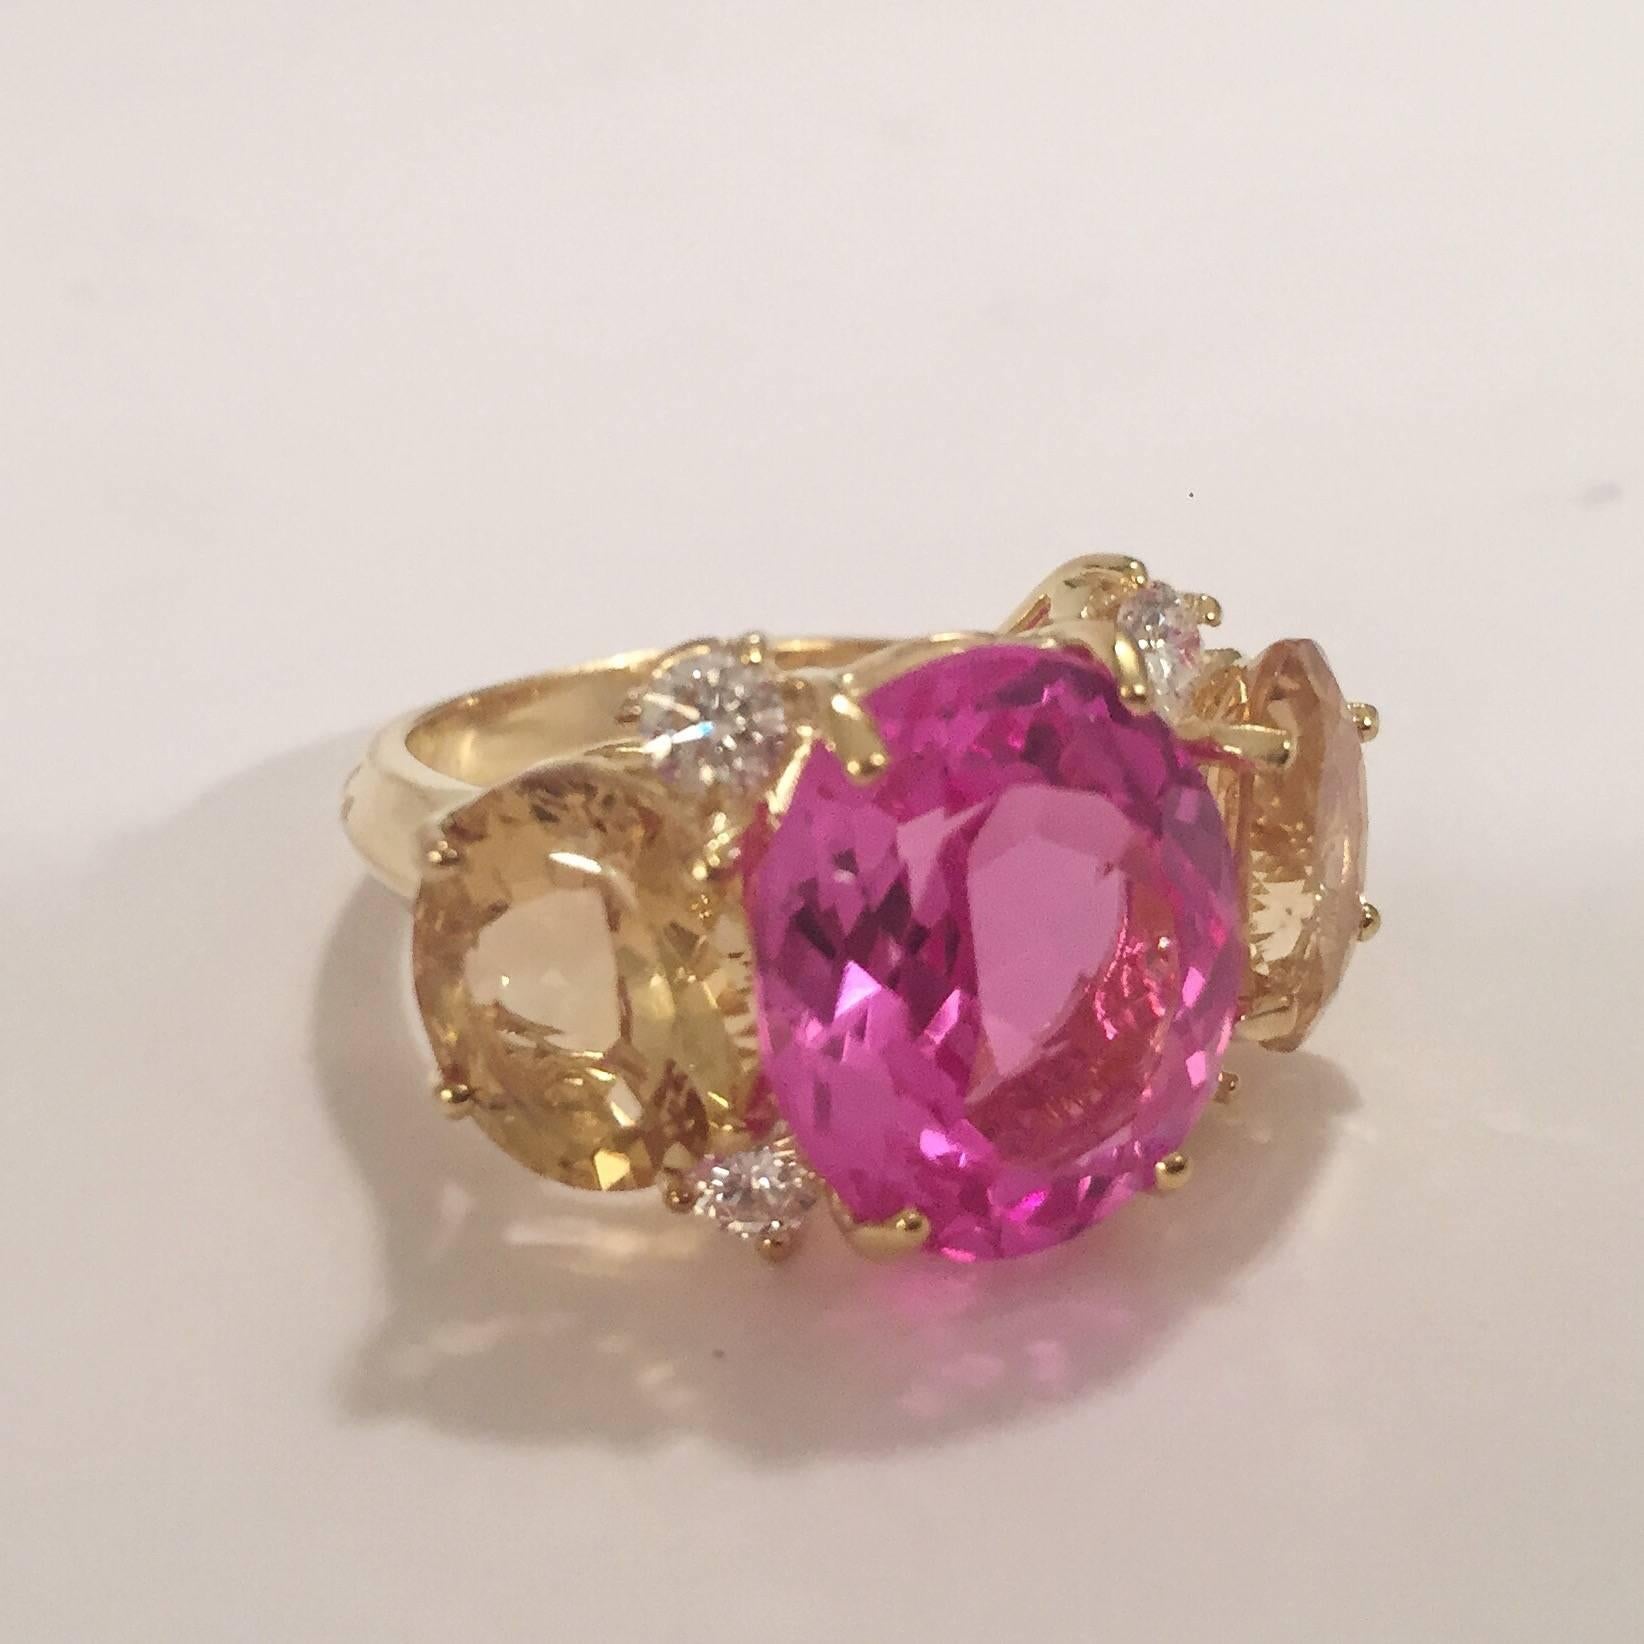 Large 18kt yellow gold GUM DROP™ ring with Pink Topaz (approximately 8 cts), Citrine (approximately 5 cts each), and 4 diamonds weighing approximately 0.48 cts.  
Specifications: Length: 15/16" Width: 5/8" 
 
The ring can be sized or